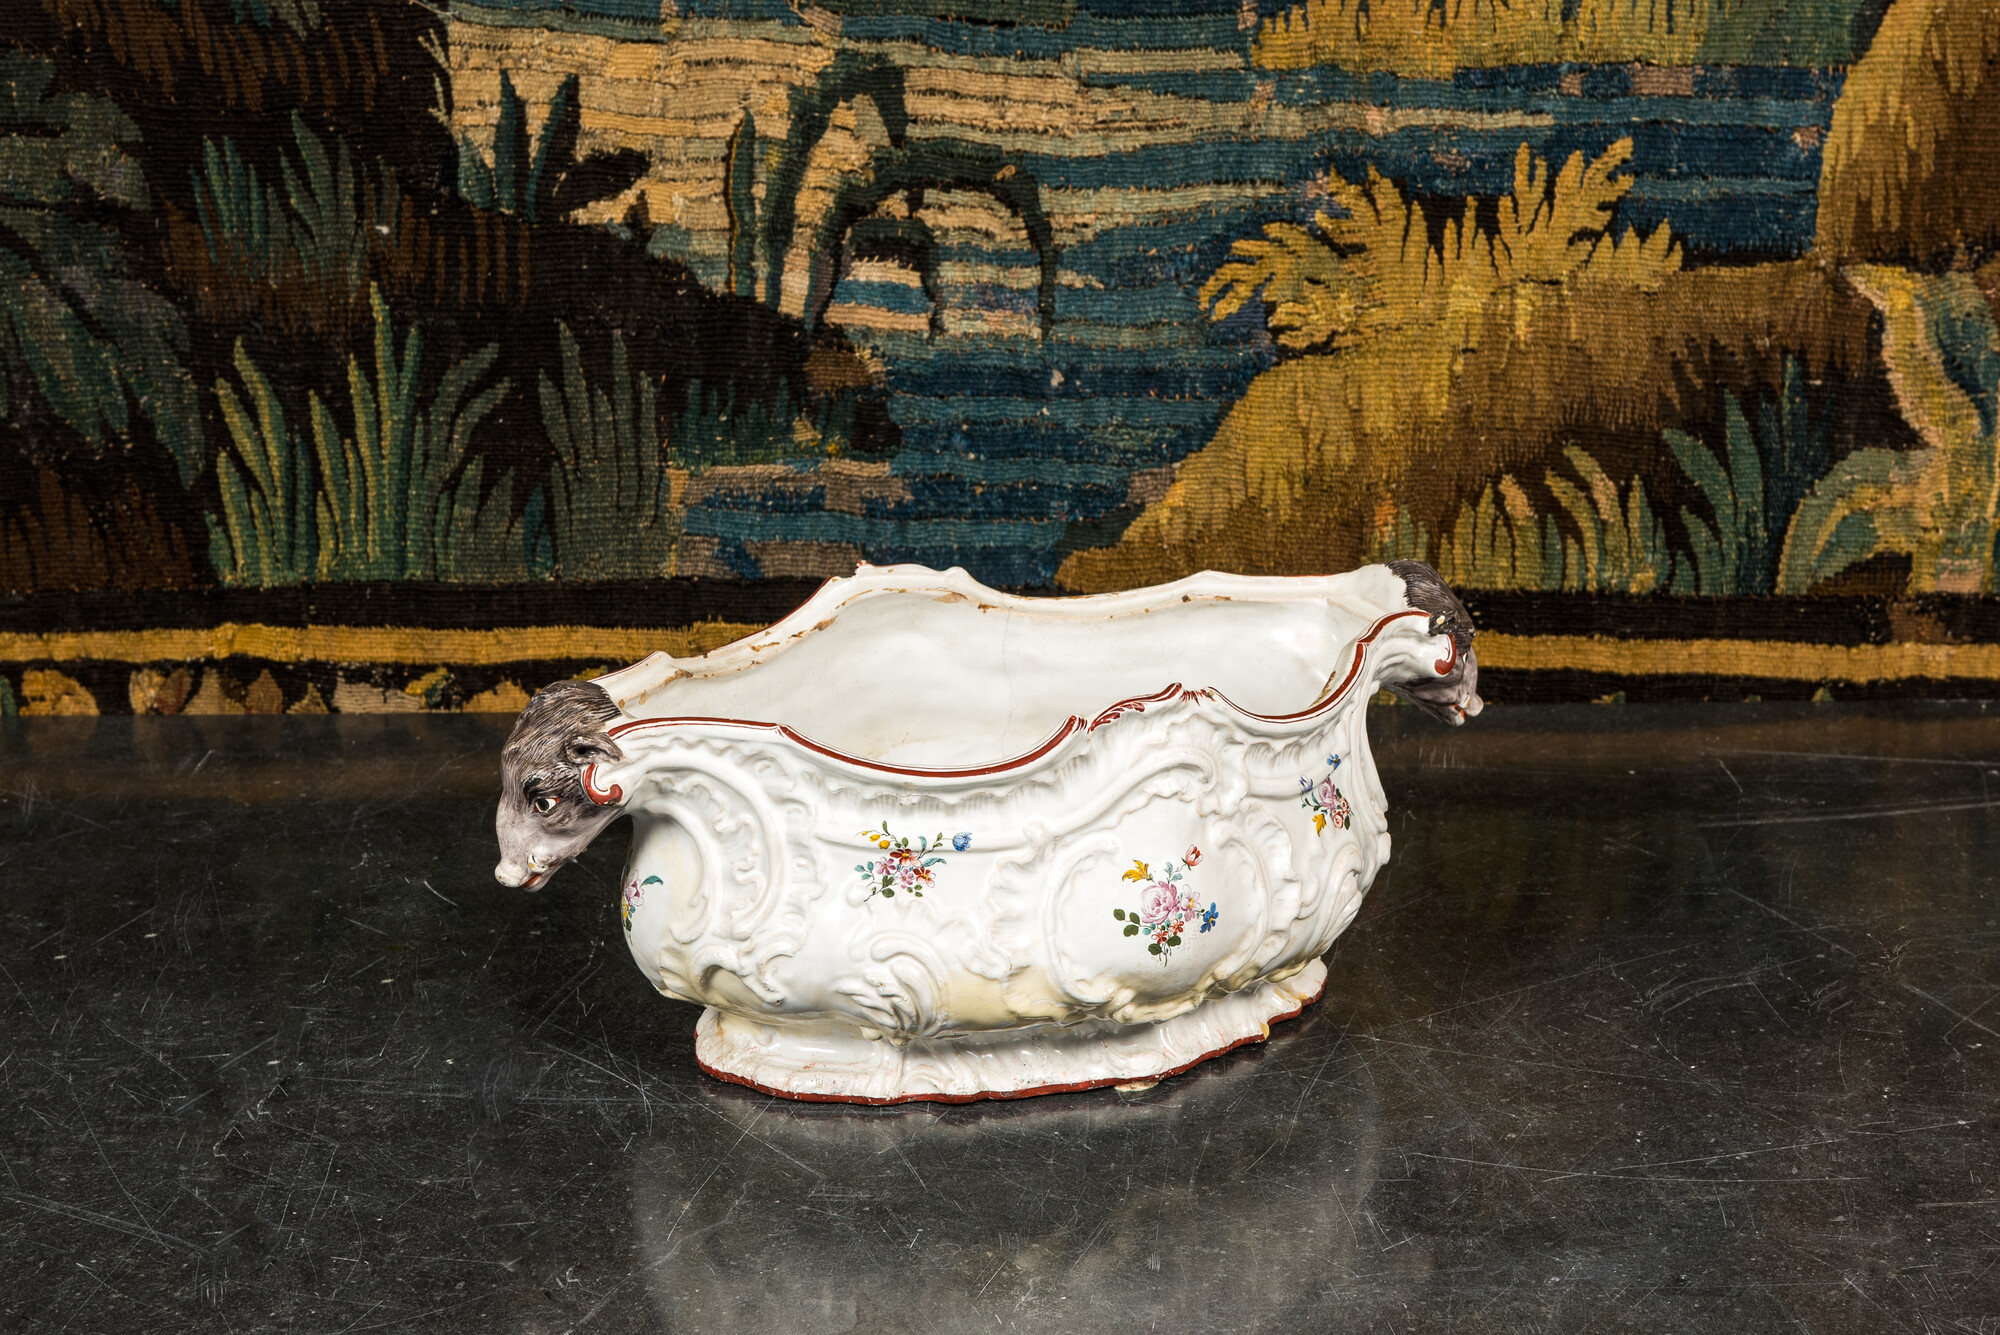 A polychrome Swedish faience jardiniere, probably Rorstrand, dated 1760